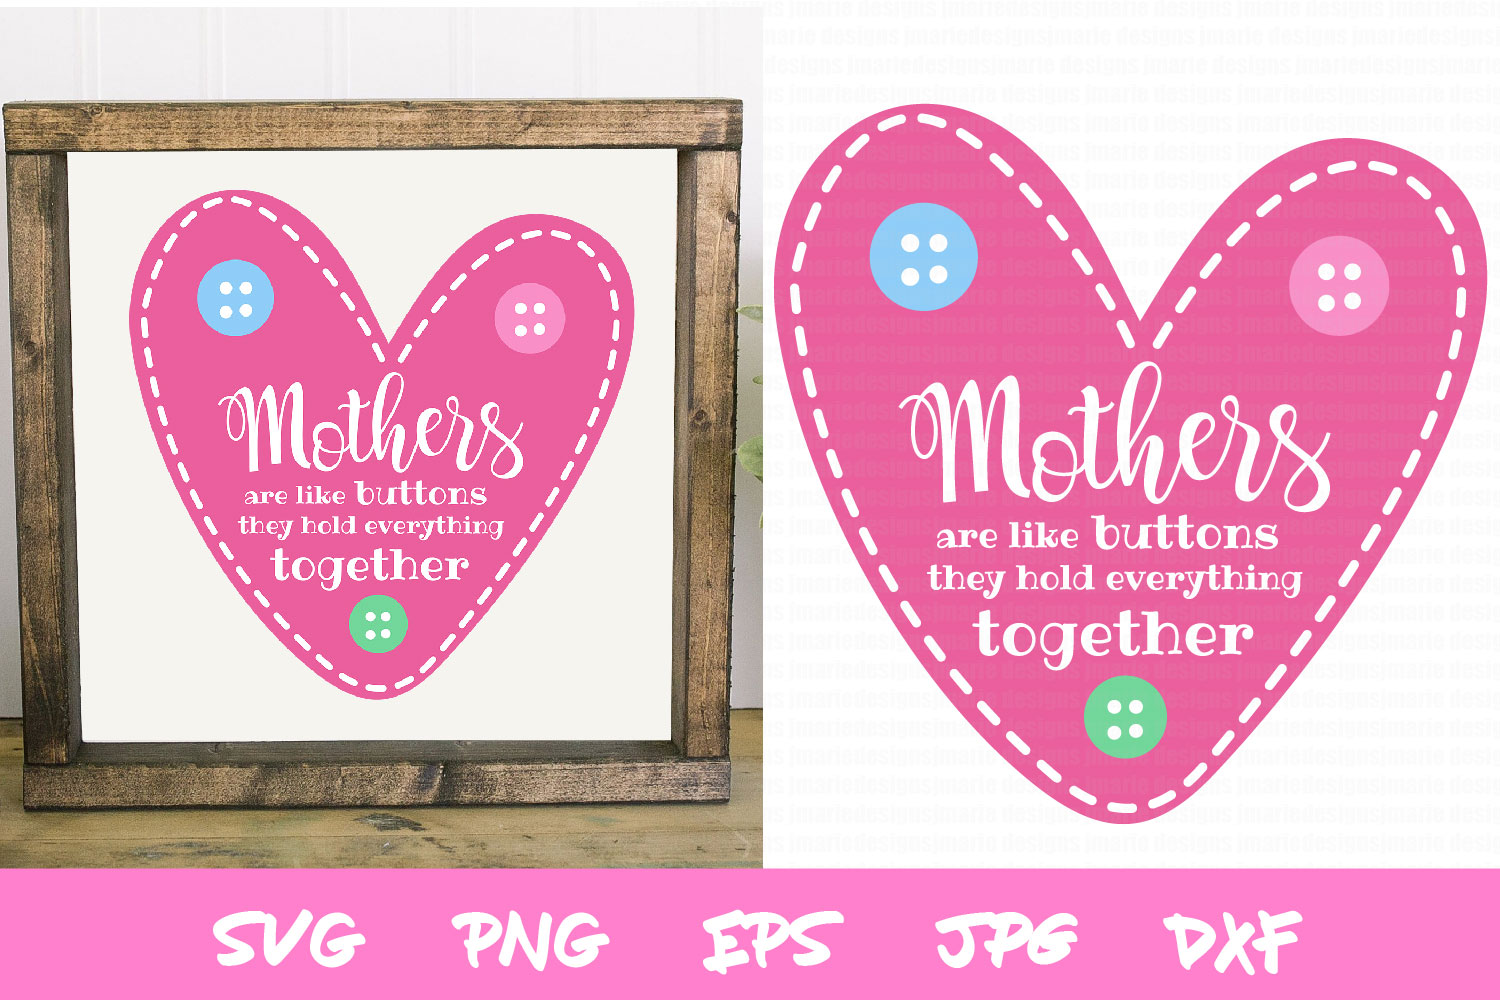 Download Mothers Day SVG, Mothers are like buttons quote